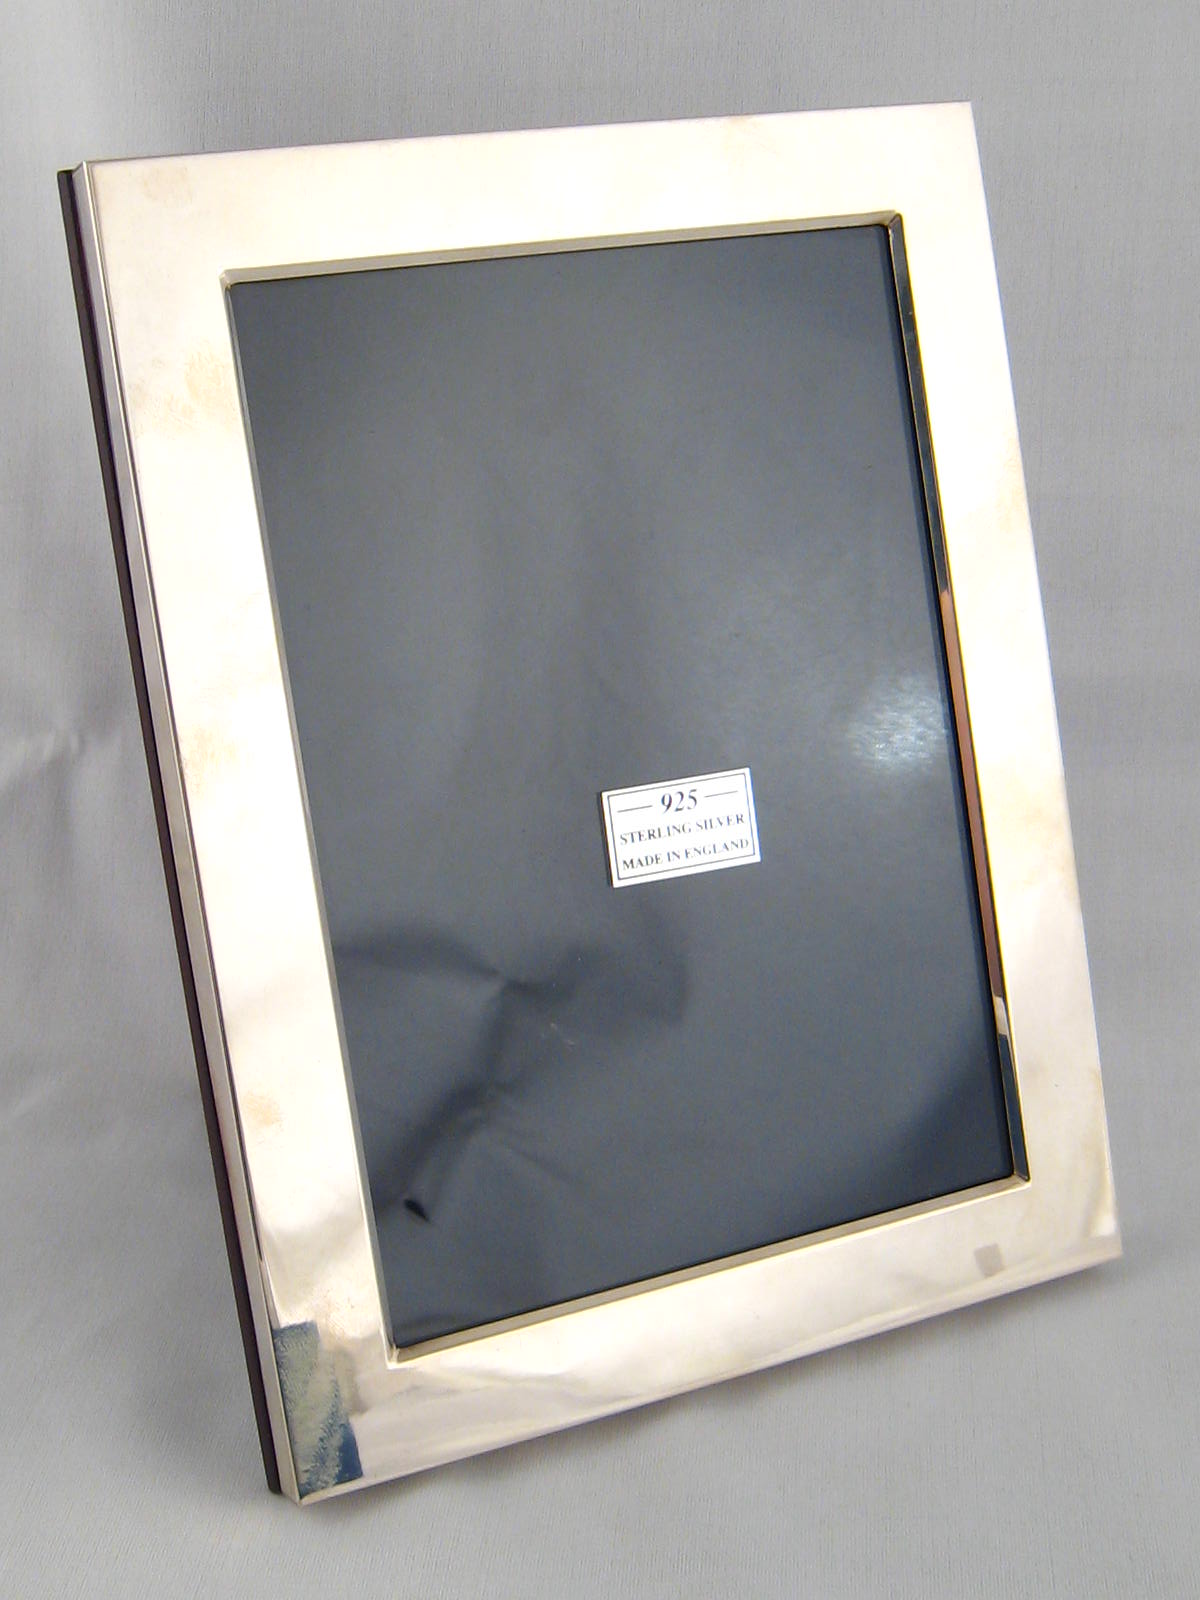 A silver photo frame with strut back, 16x21cm. in protective box.